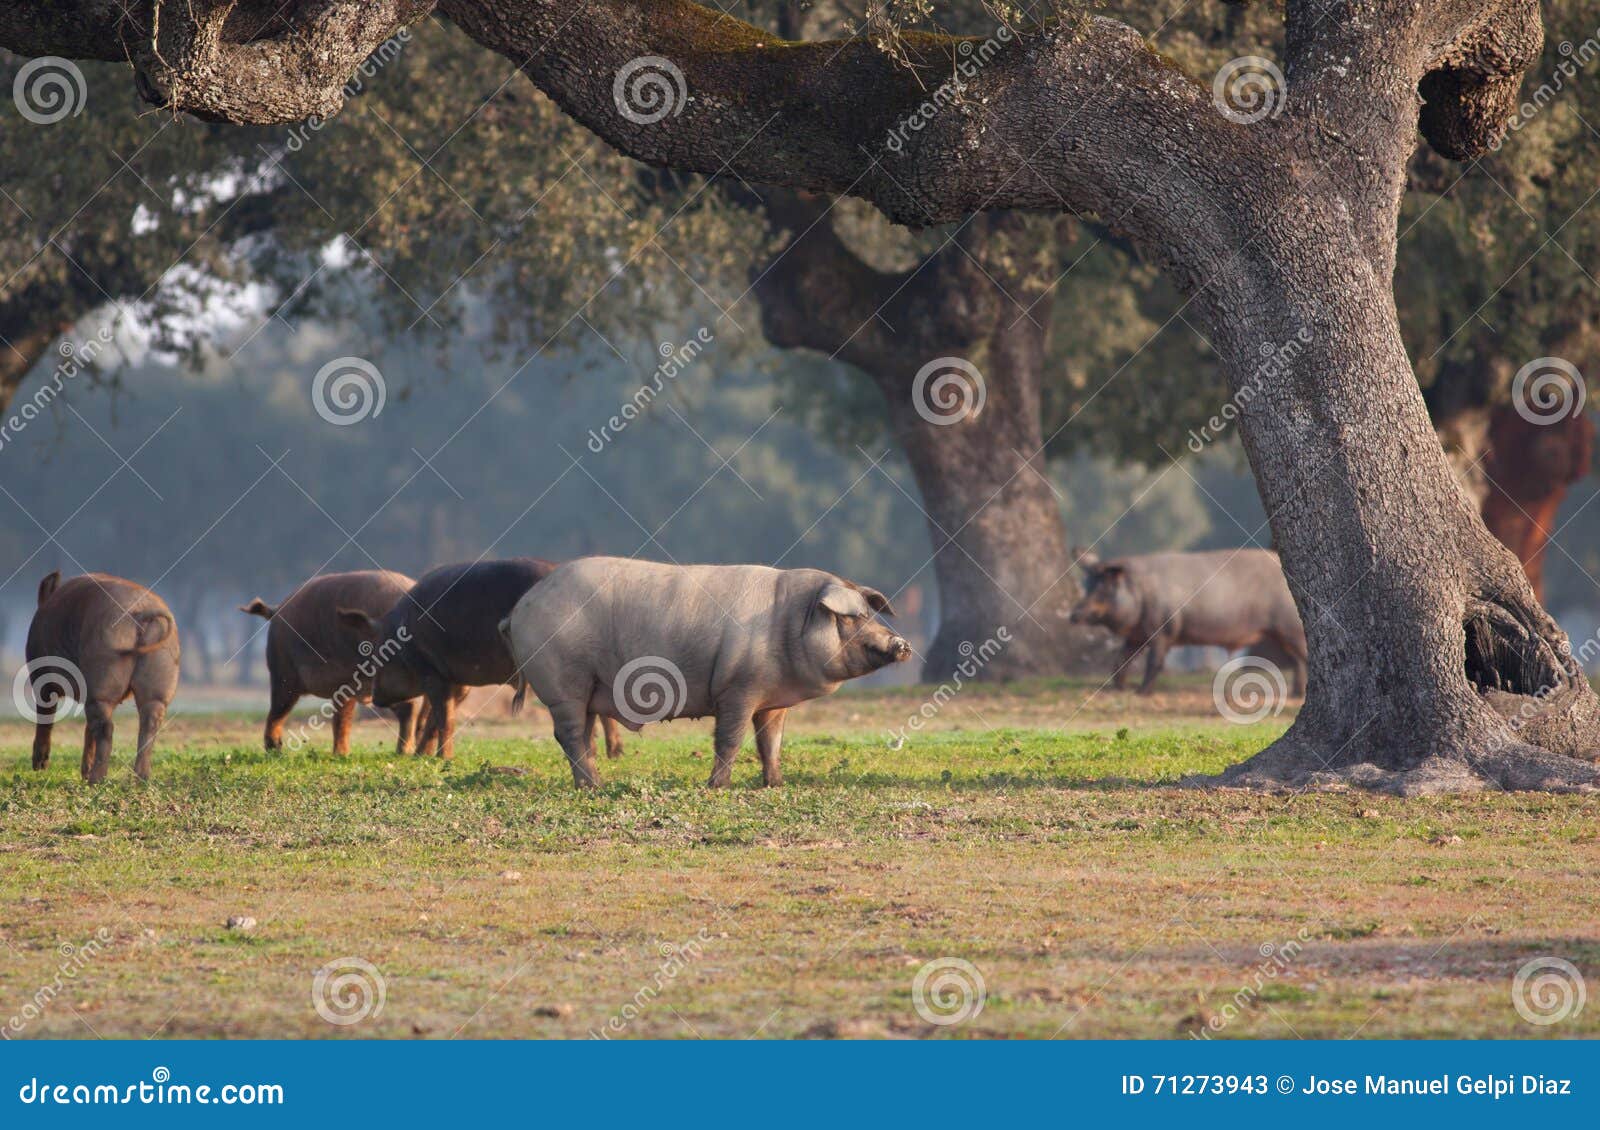 iberian pig in the meadow